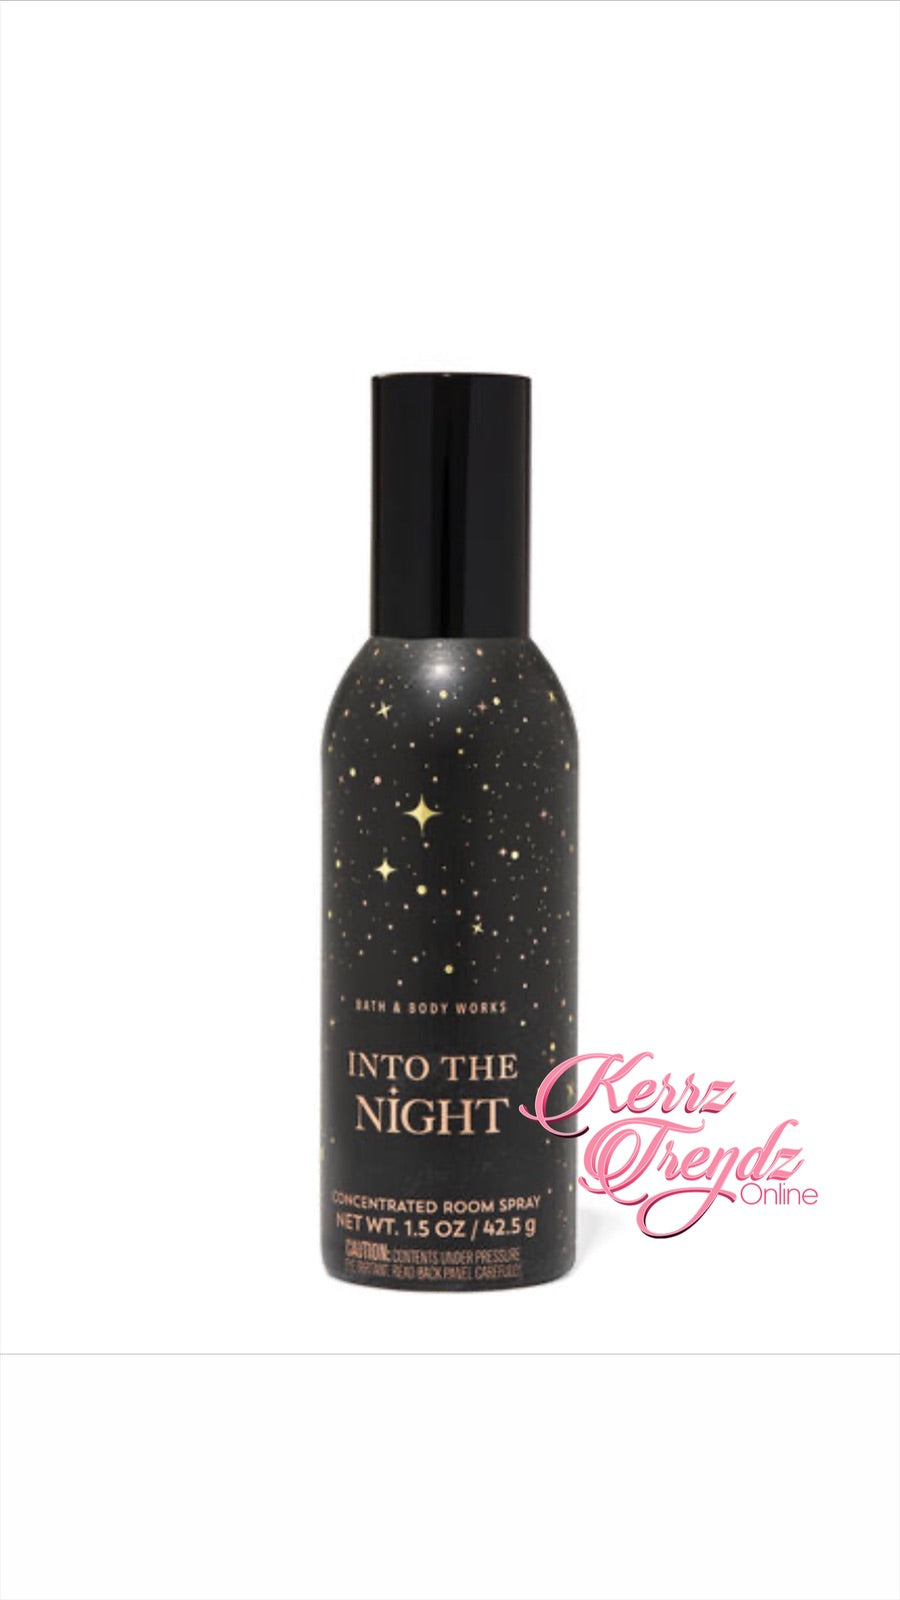 Into The Night Concentrated Room Spray